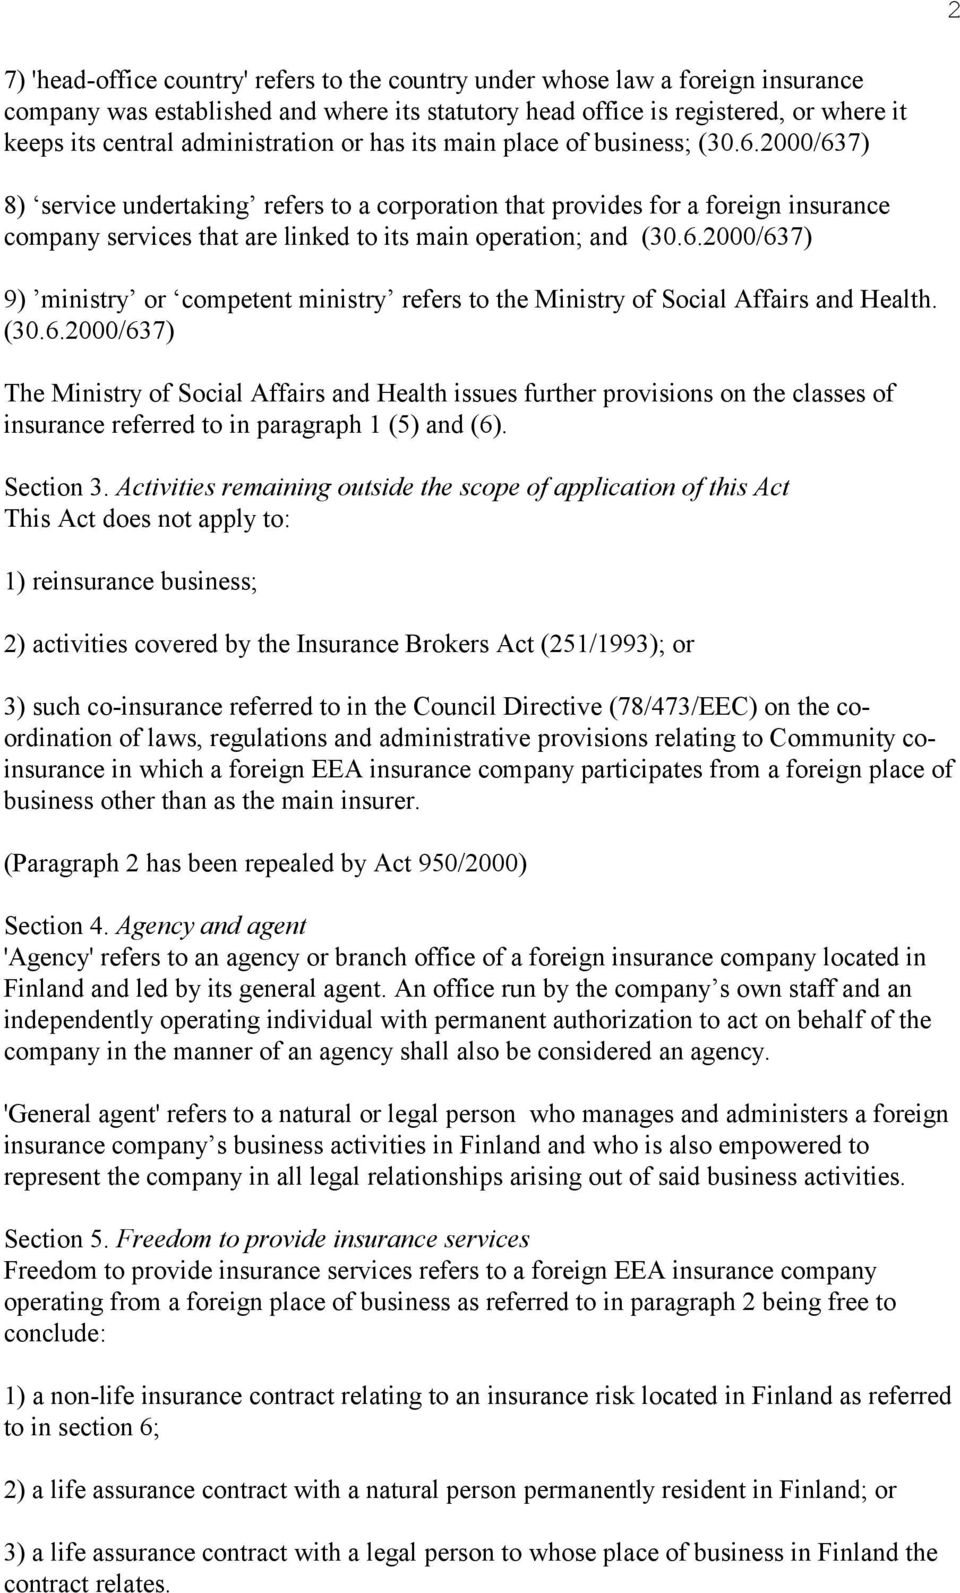 2000/637) 8) service undertaking refers to a corporation that provides for a foreign insurance company services that are linked to its main operation; and (30.6.2000/637) 9) ministry or competent ministry refers to the Ministry of Social Affairs and Health.